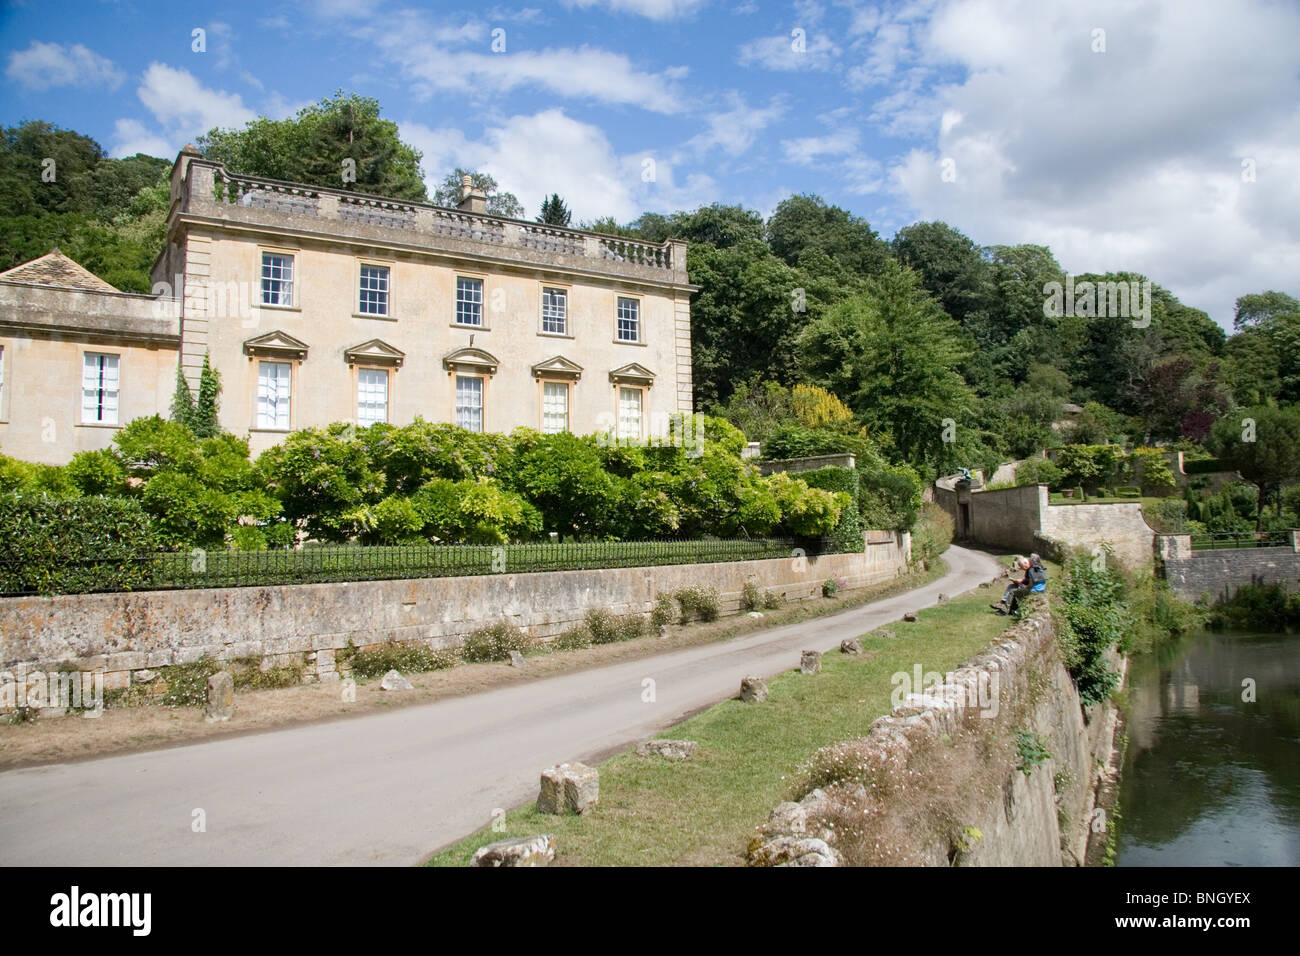 Iford Manor by the River Frome, Wiltshire, UK Stock Photo